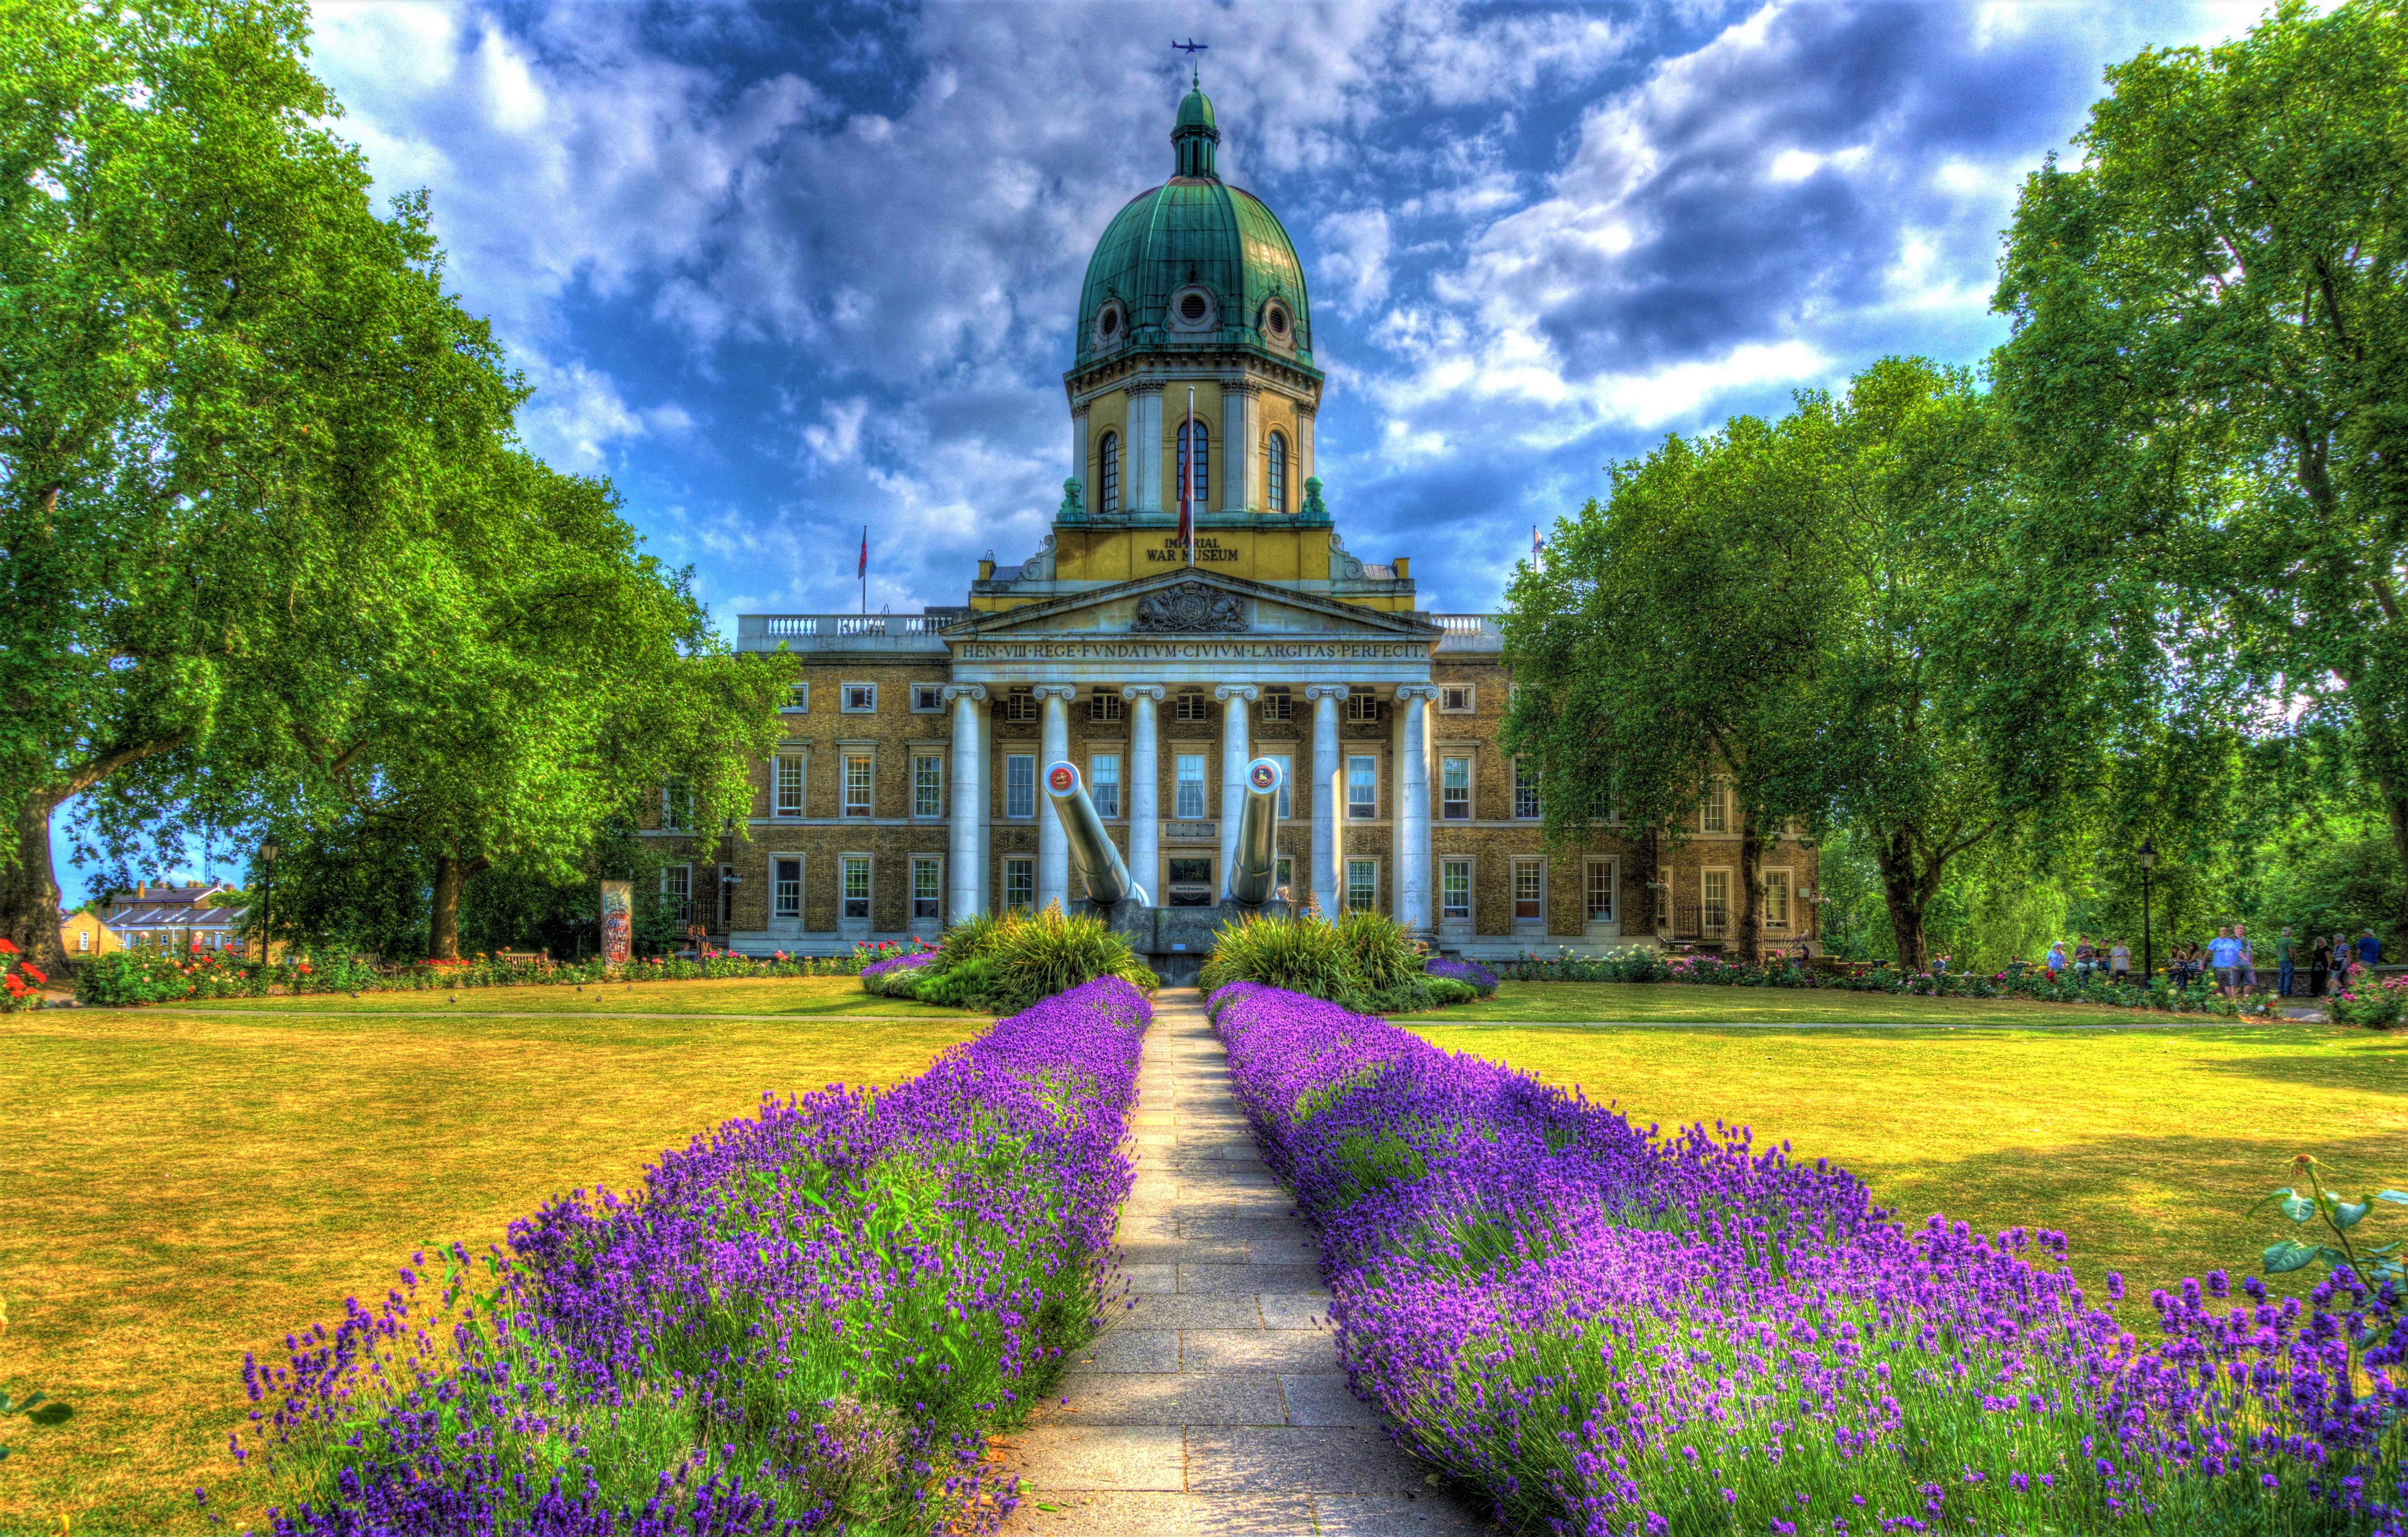 man made, museum, building, garden, hdr, impegrial war museum, purple flower, spring